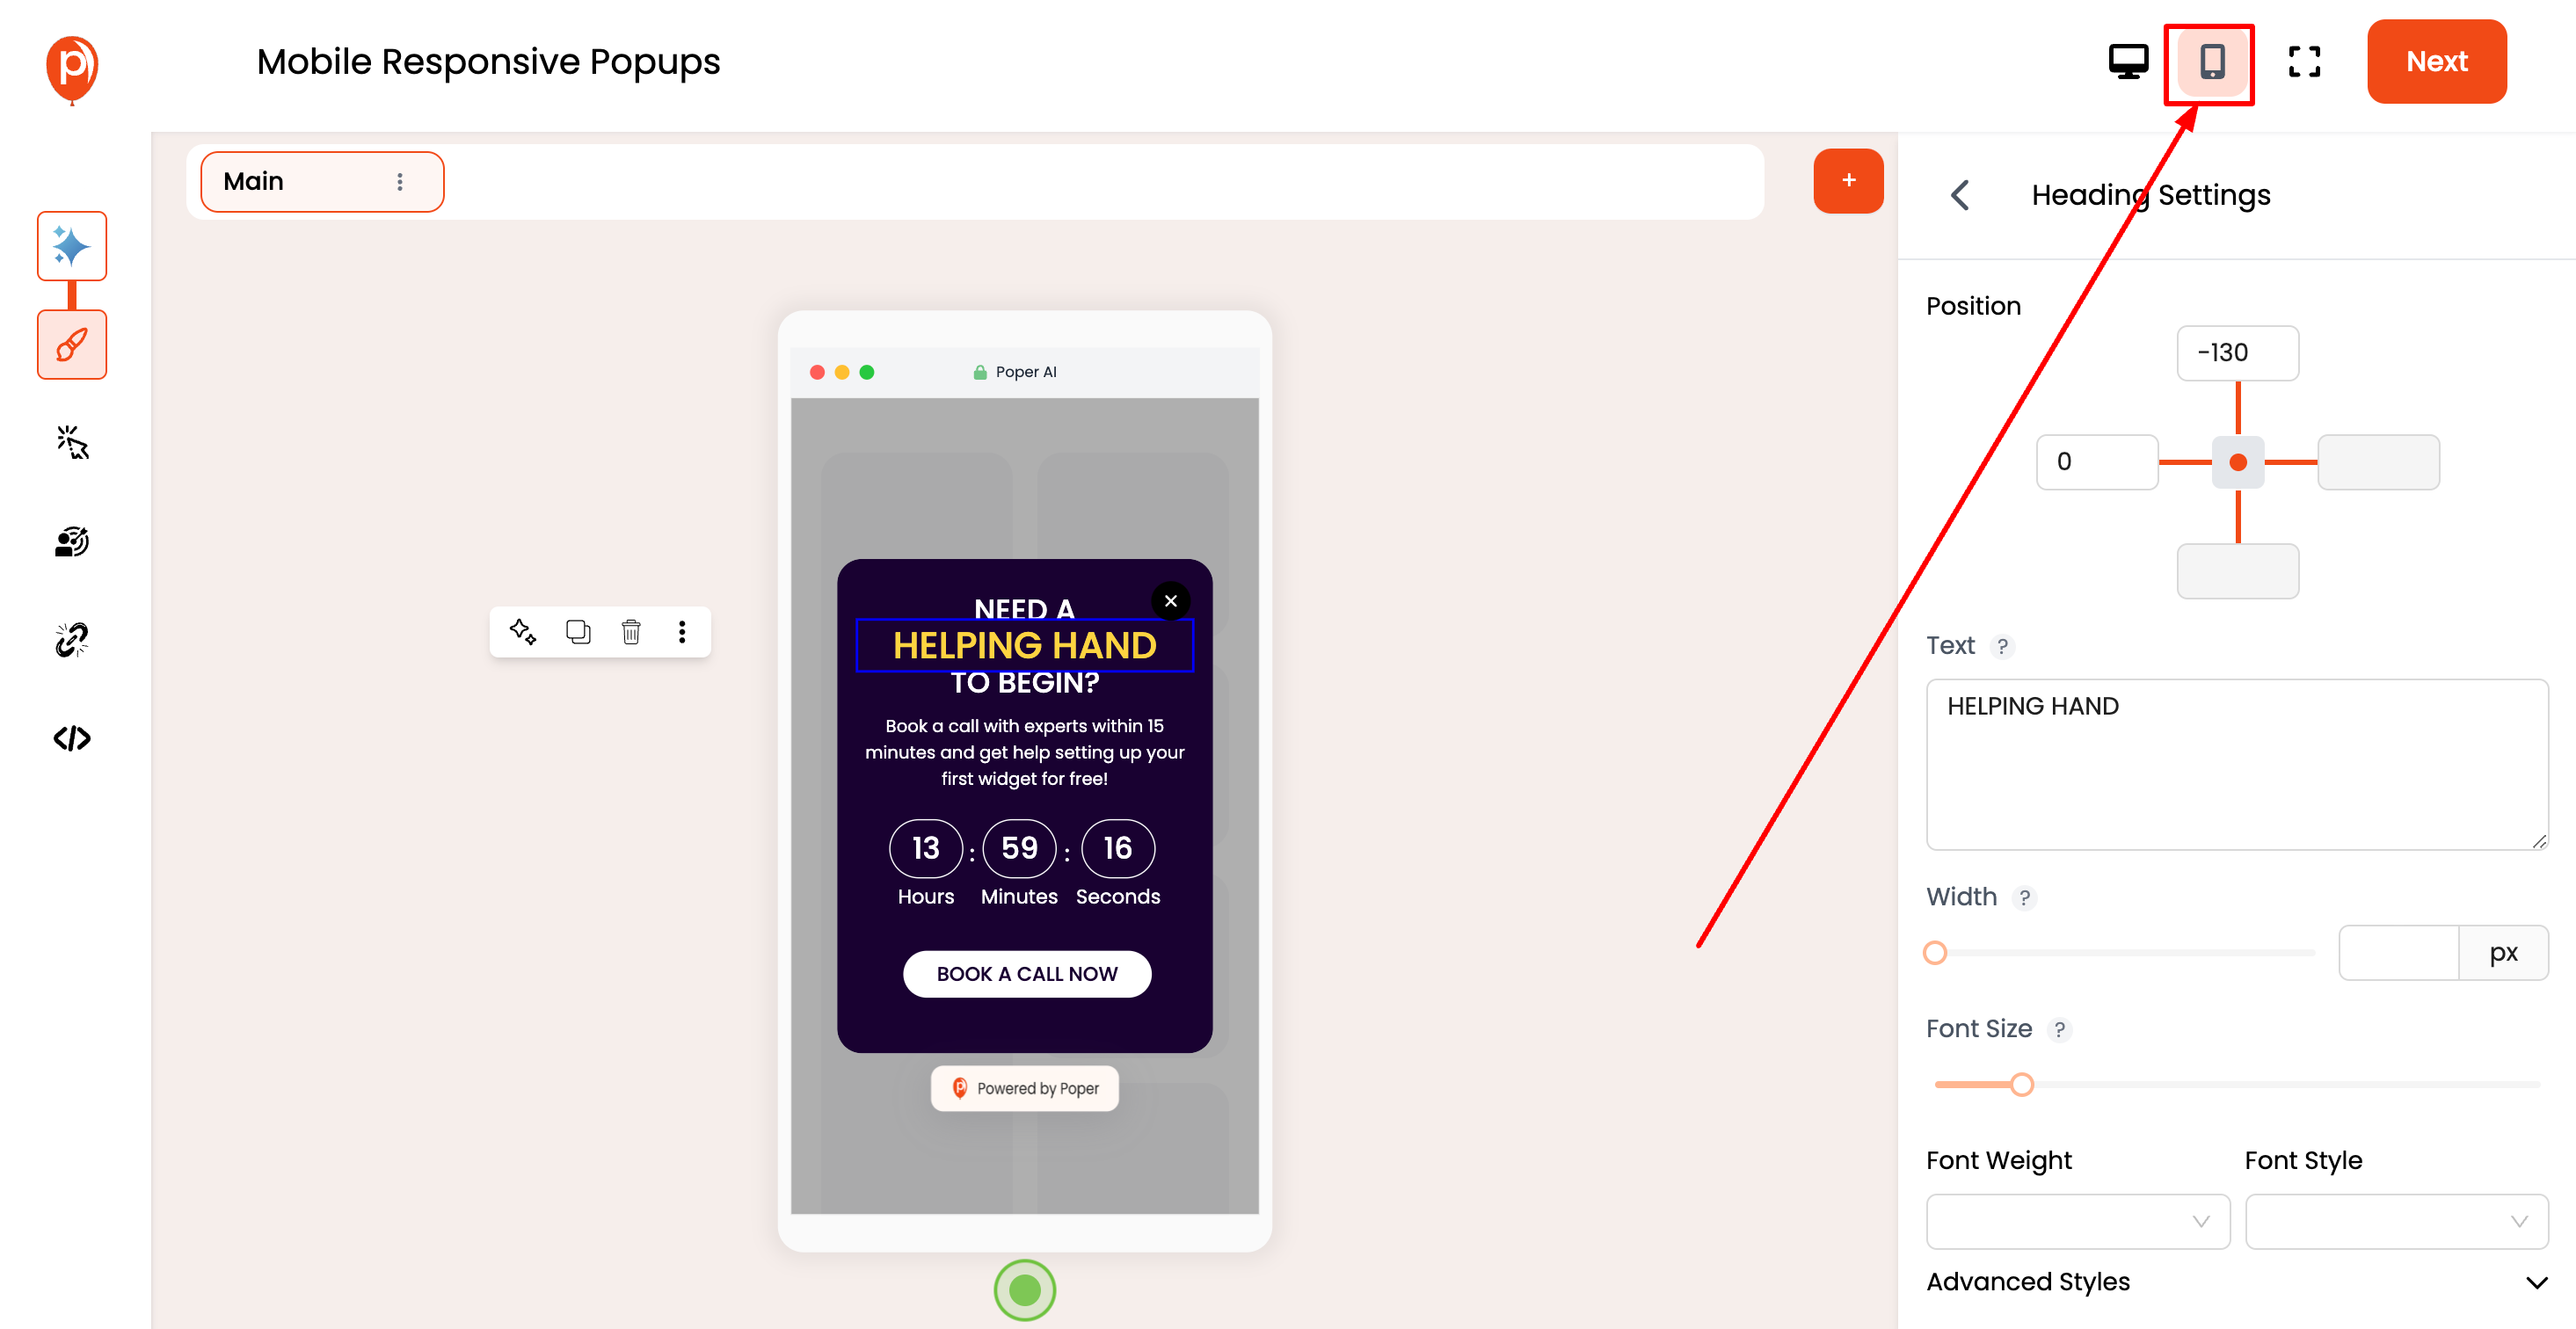 Making Mobile Responsive Popups Easy